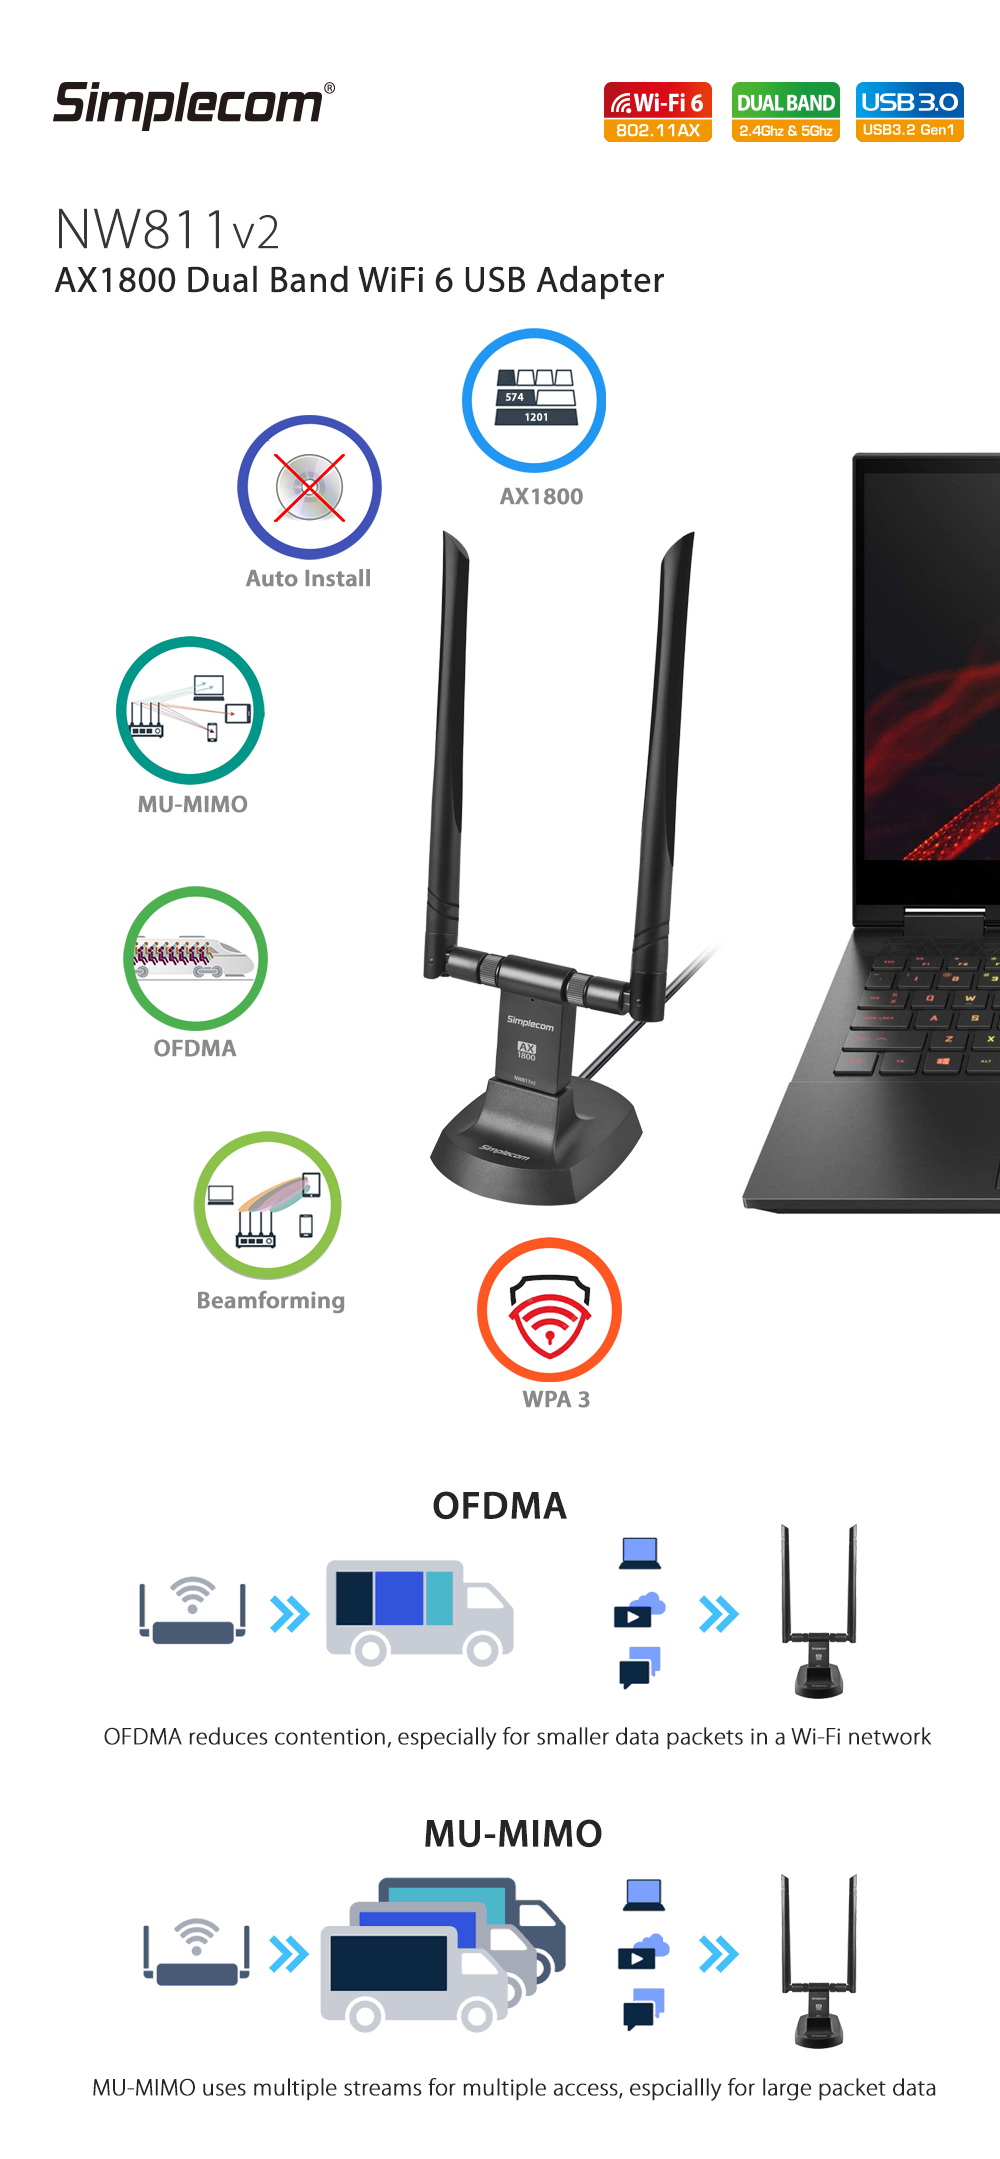 A large marketing image providing additional information about the product Simplecom NW811v2 AX1800 Dual Band WiFi 6 USB Adapter With 2x 5dBi High Gain Antennas - Additional alt info not provided